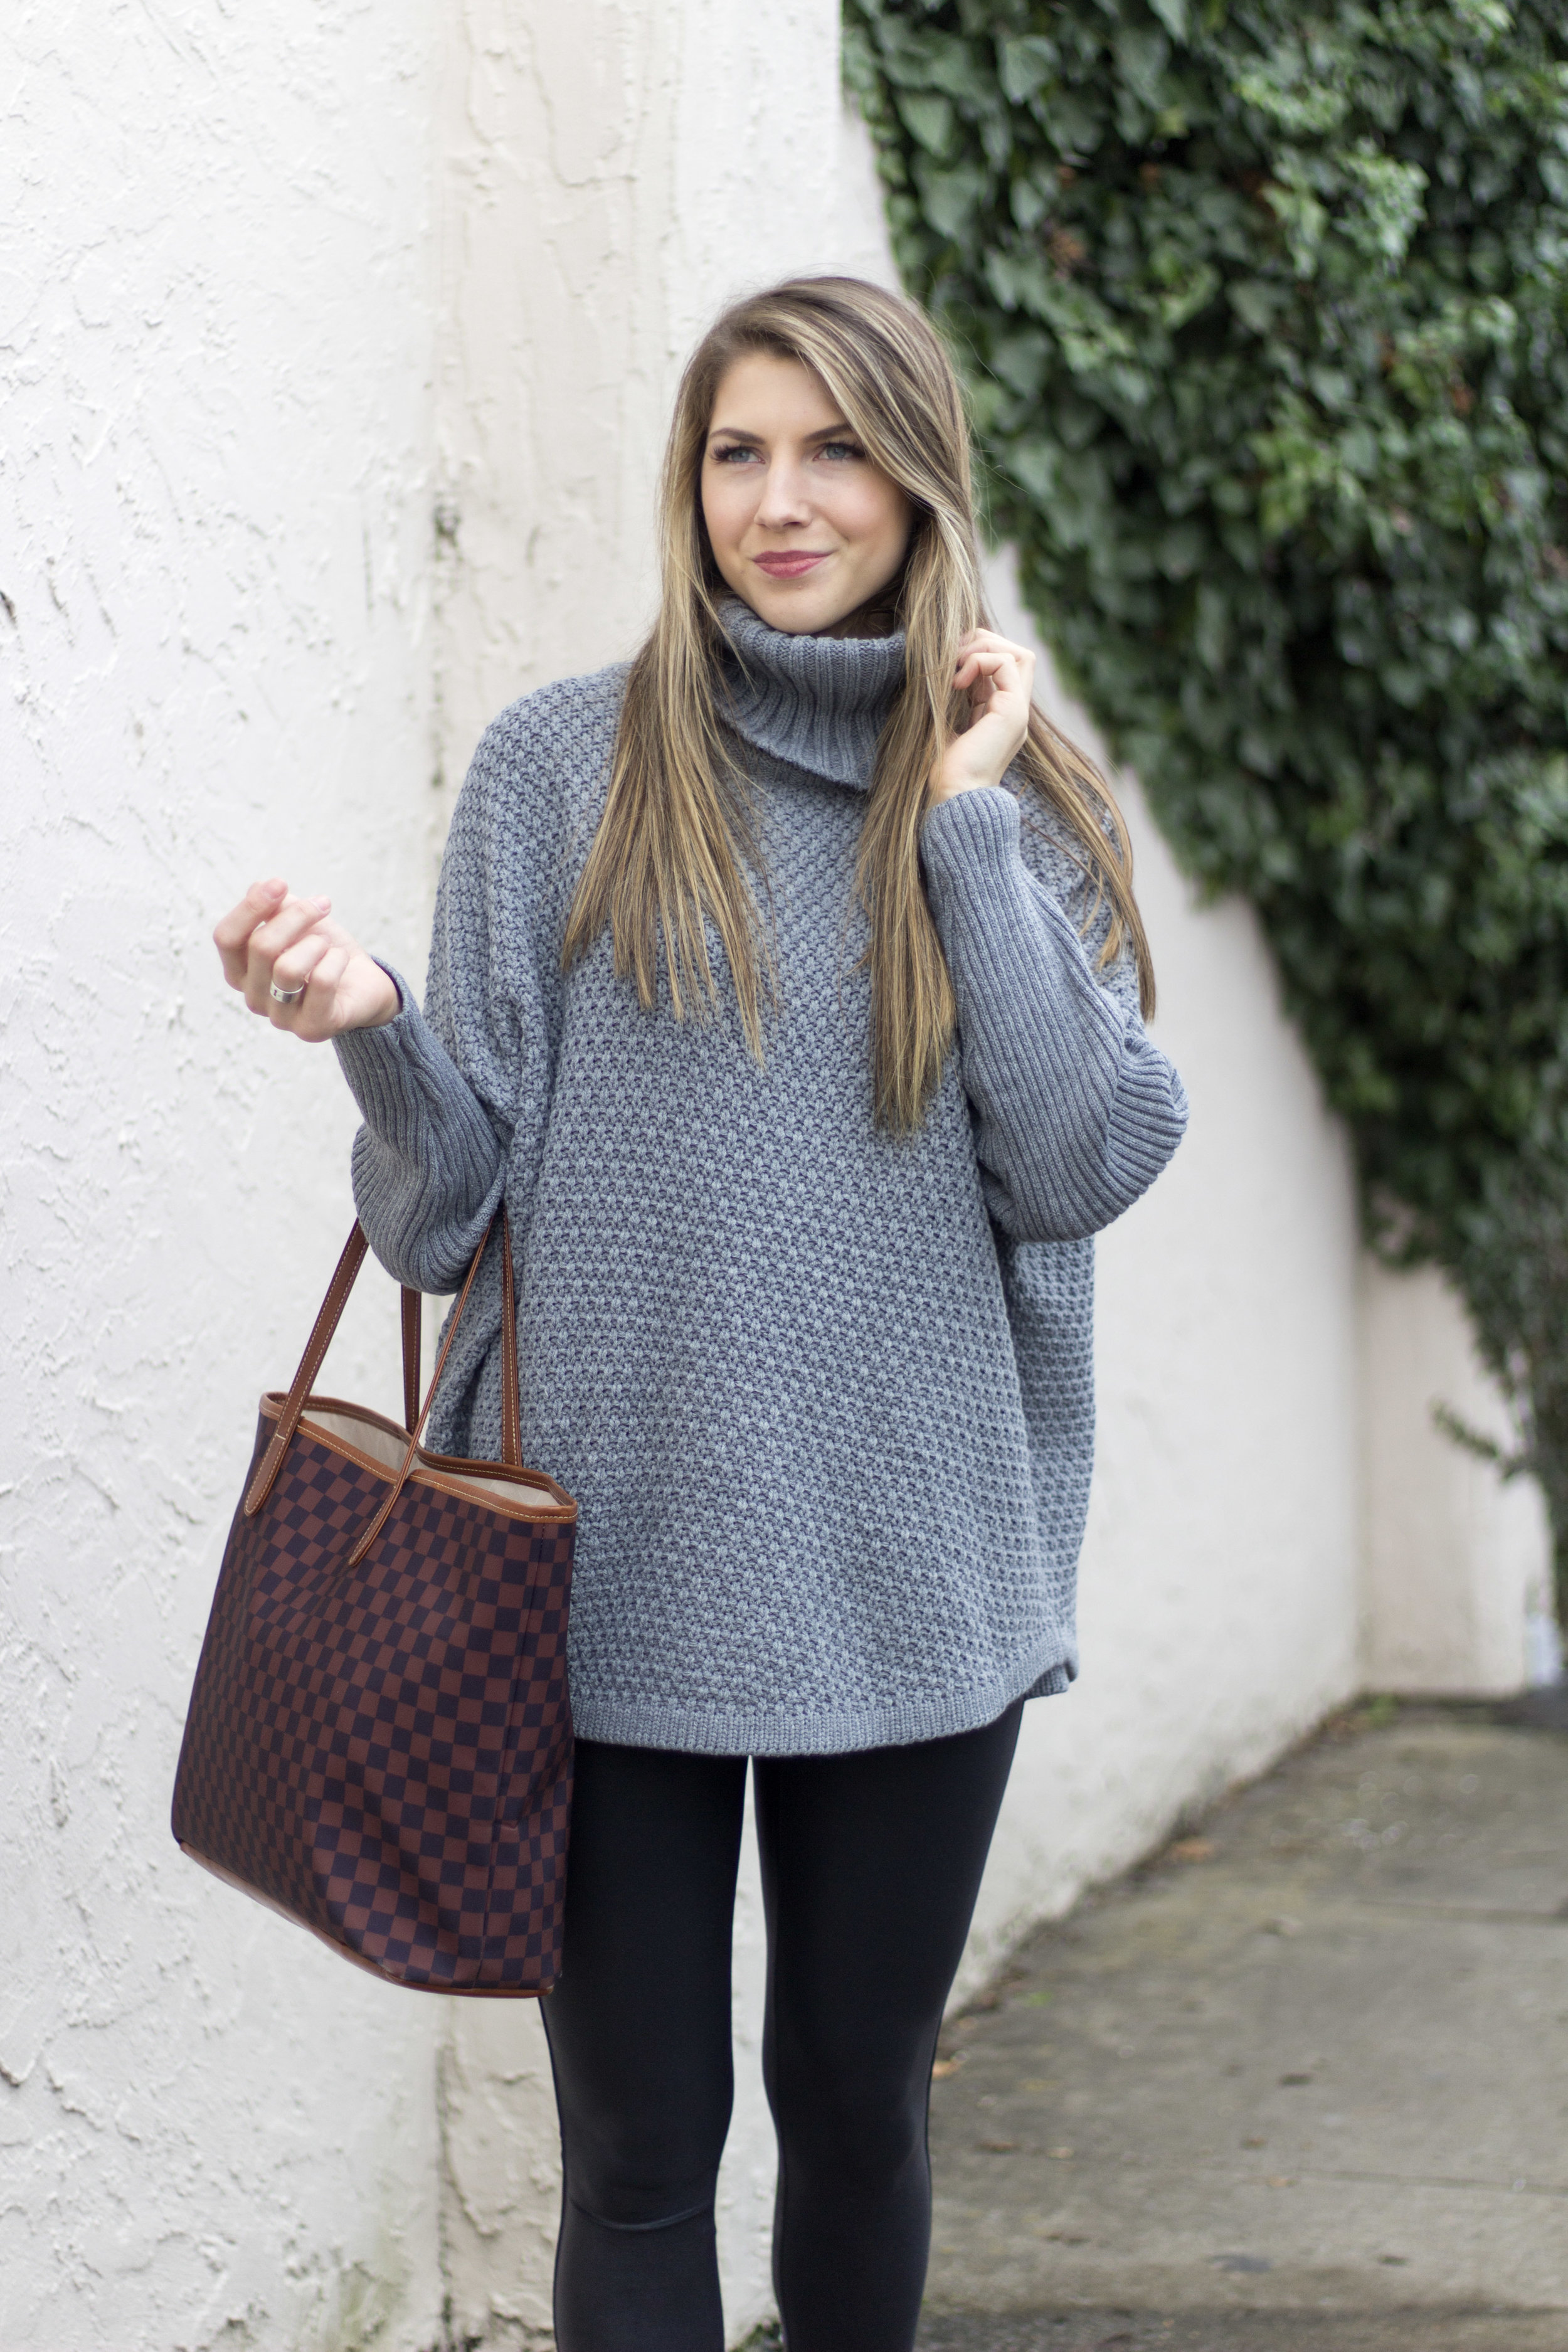 How To Wear Oversized Sweaters With Leggings